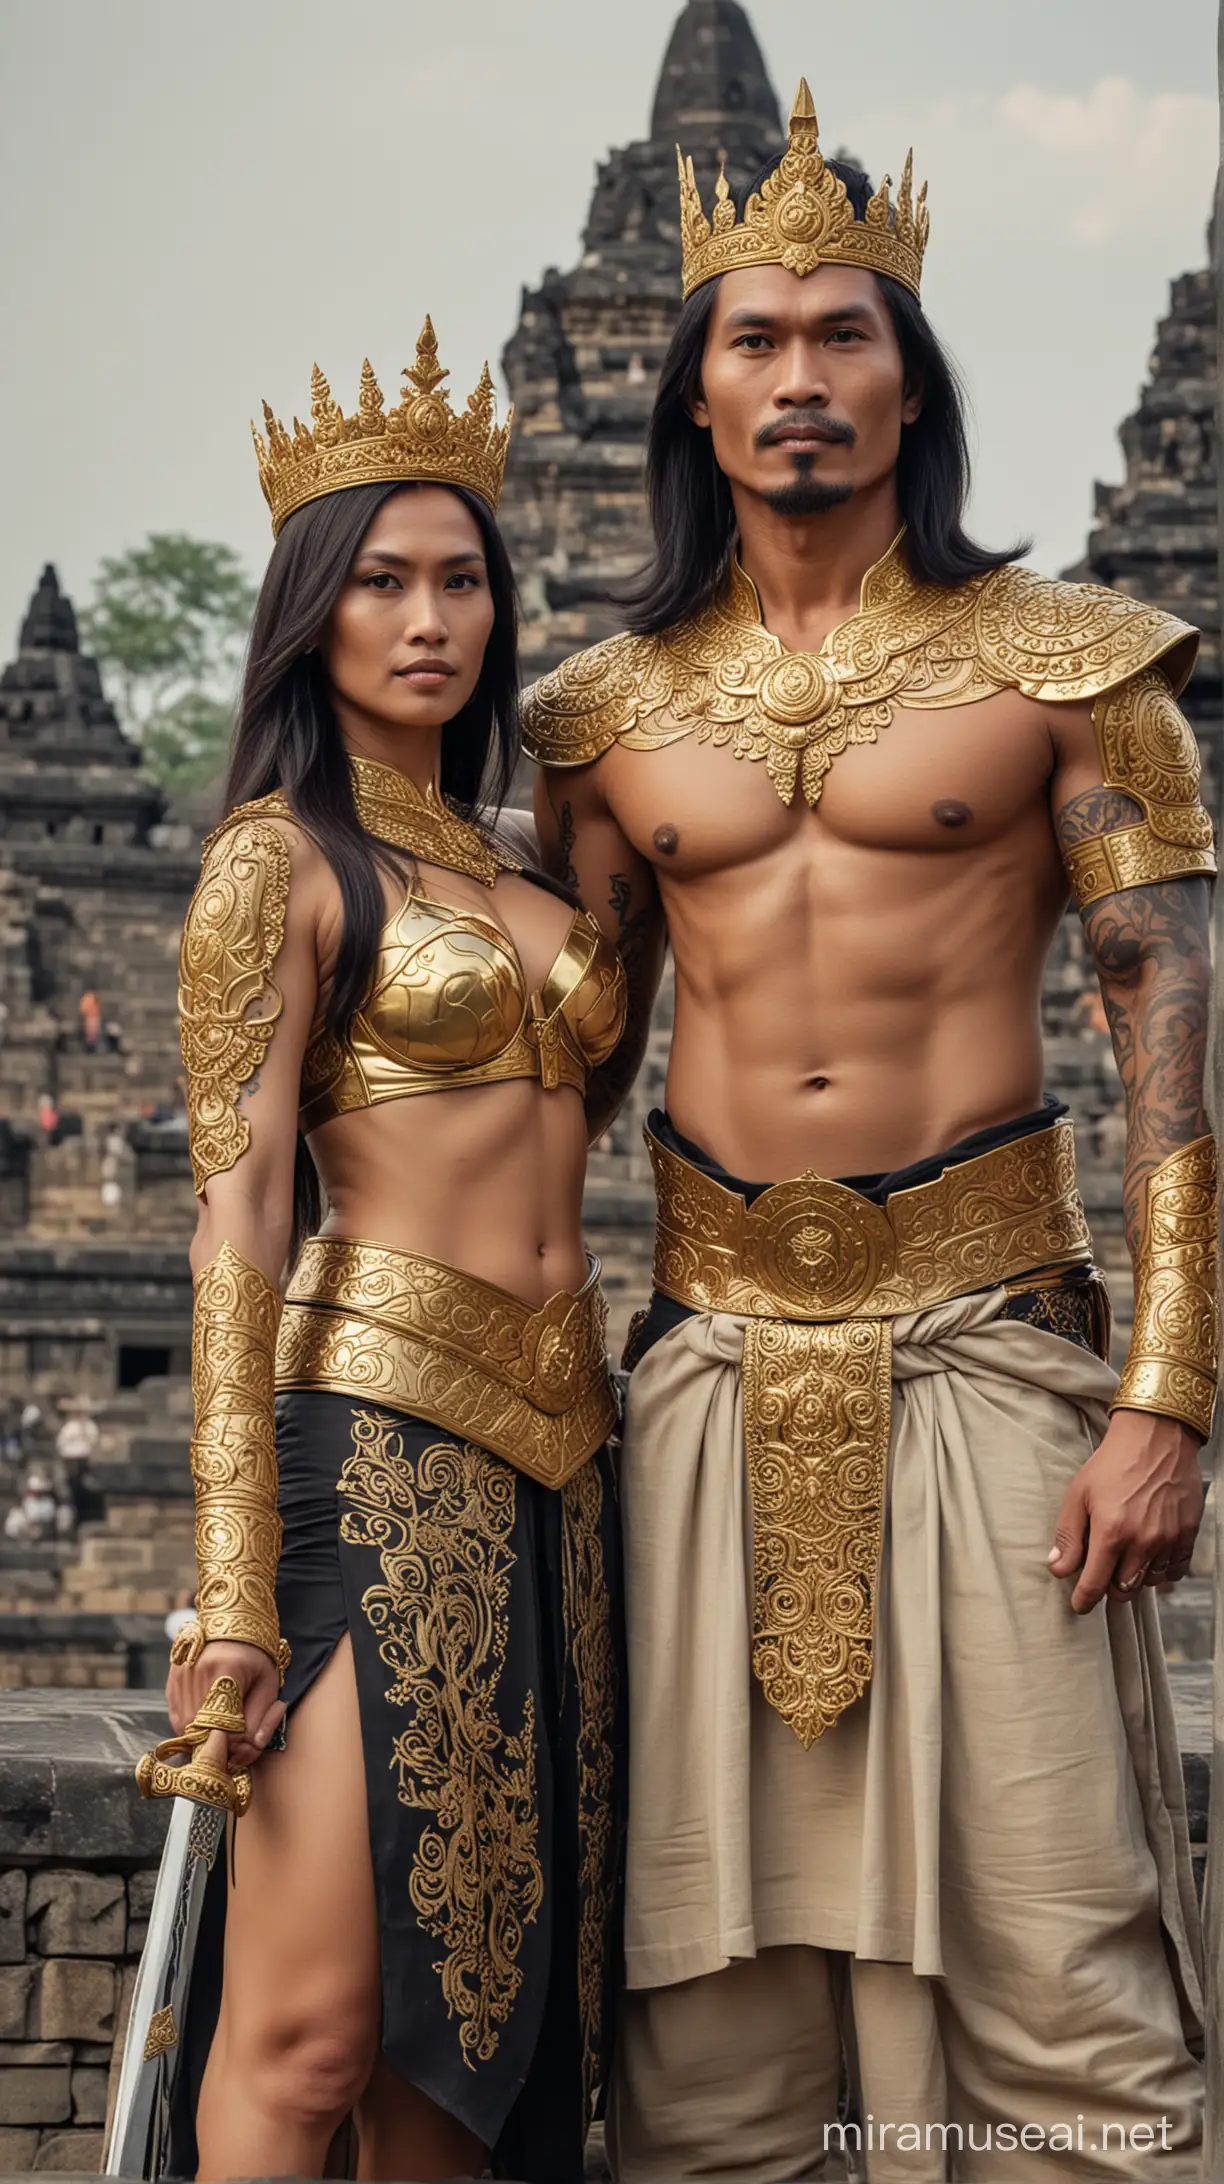 Majestic Indonesian Swordsman and His Radiant Wife at Borobudur Temple